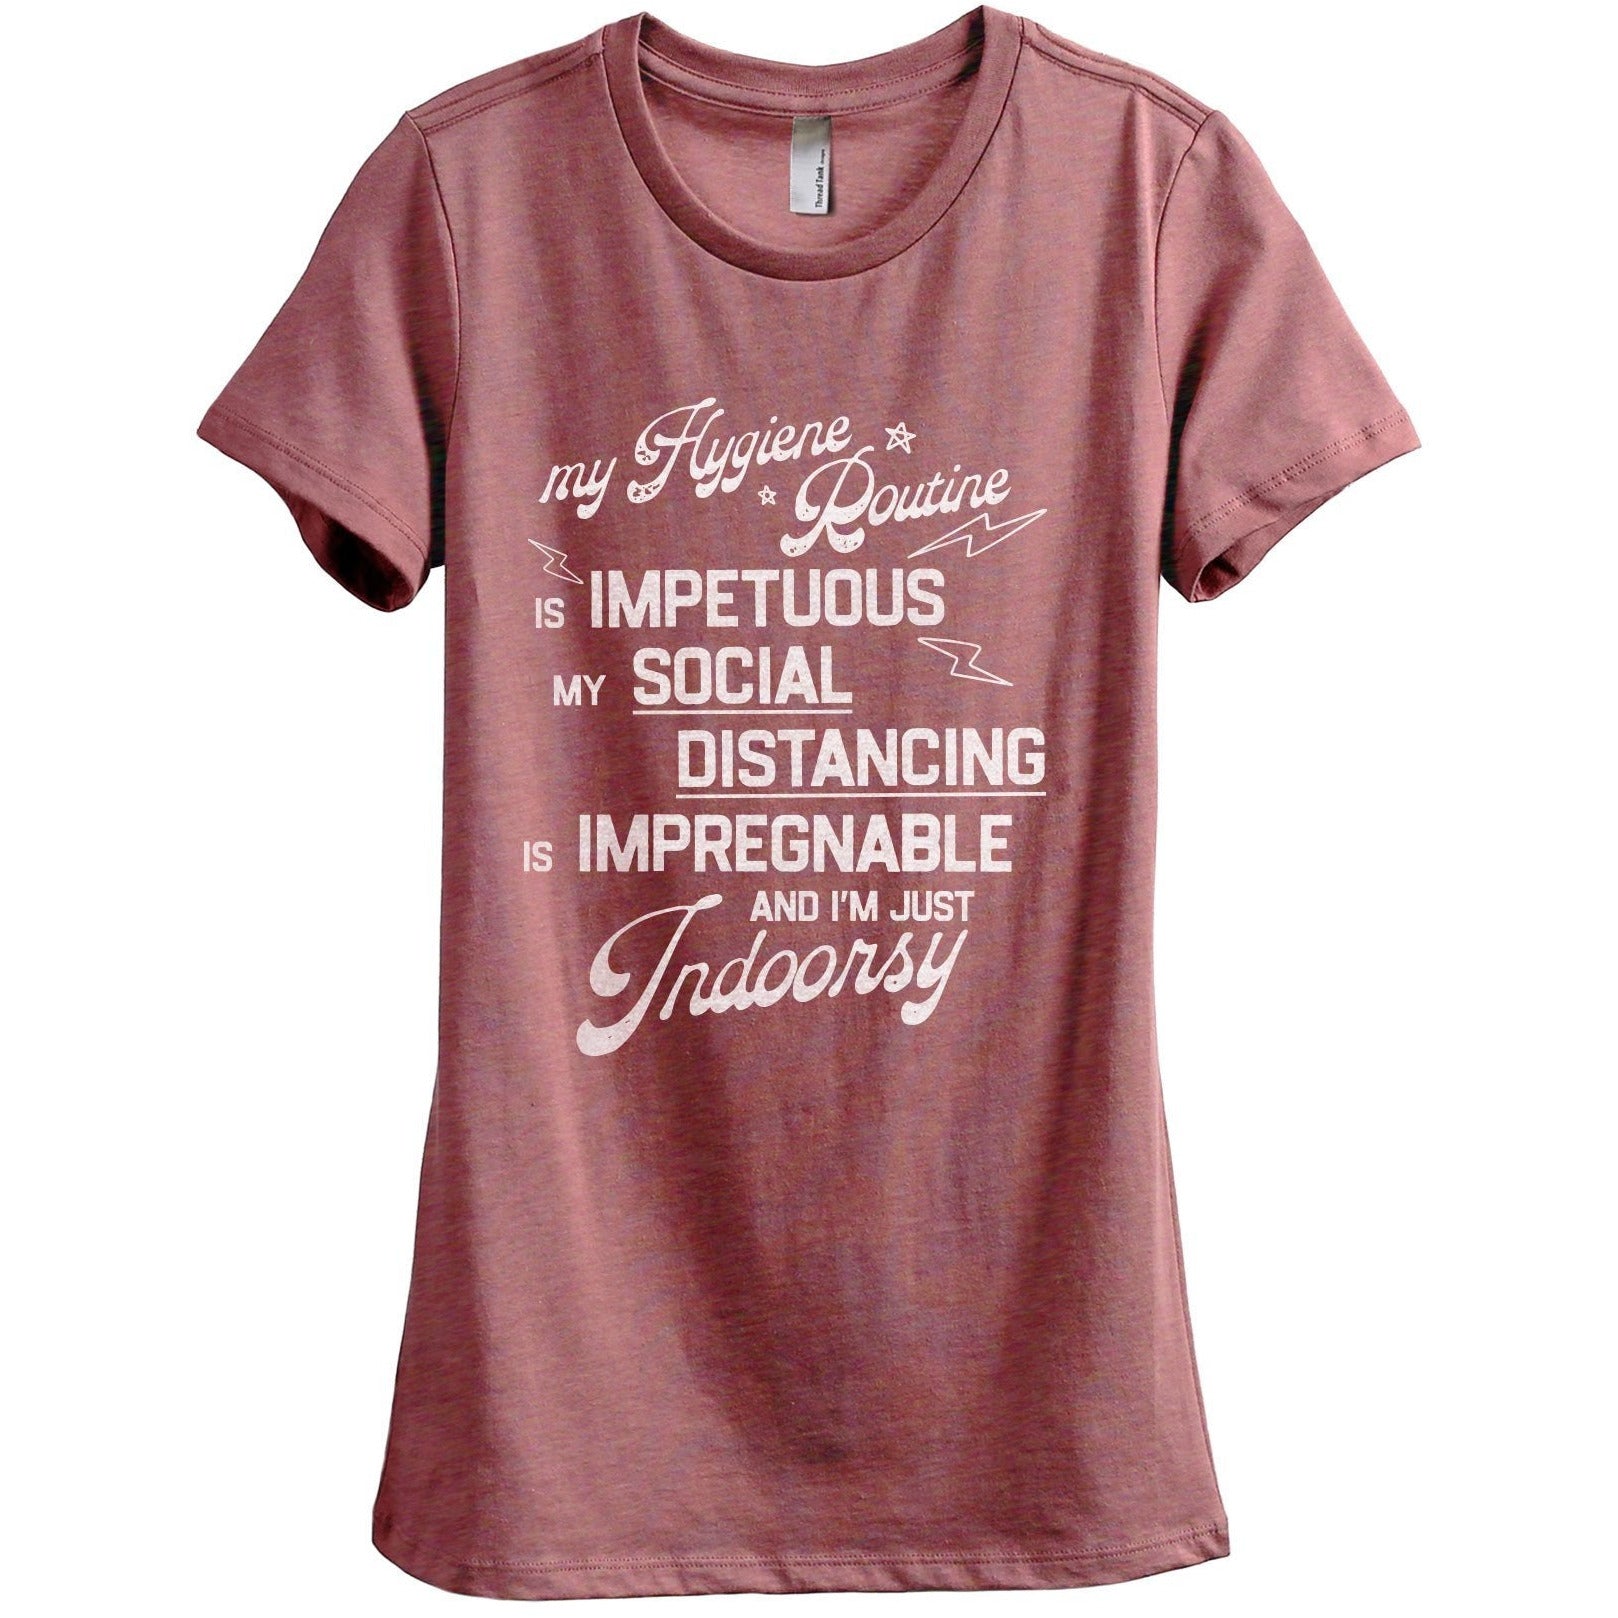 Hygiene Routine Impetuous Women's Relaxed Crewneck T-Shirt Top Tee Heather Rouge